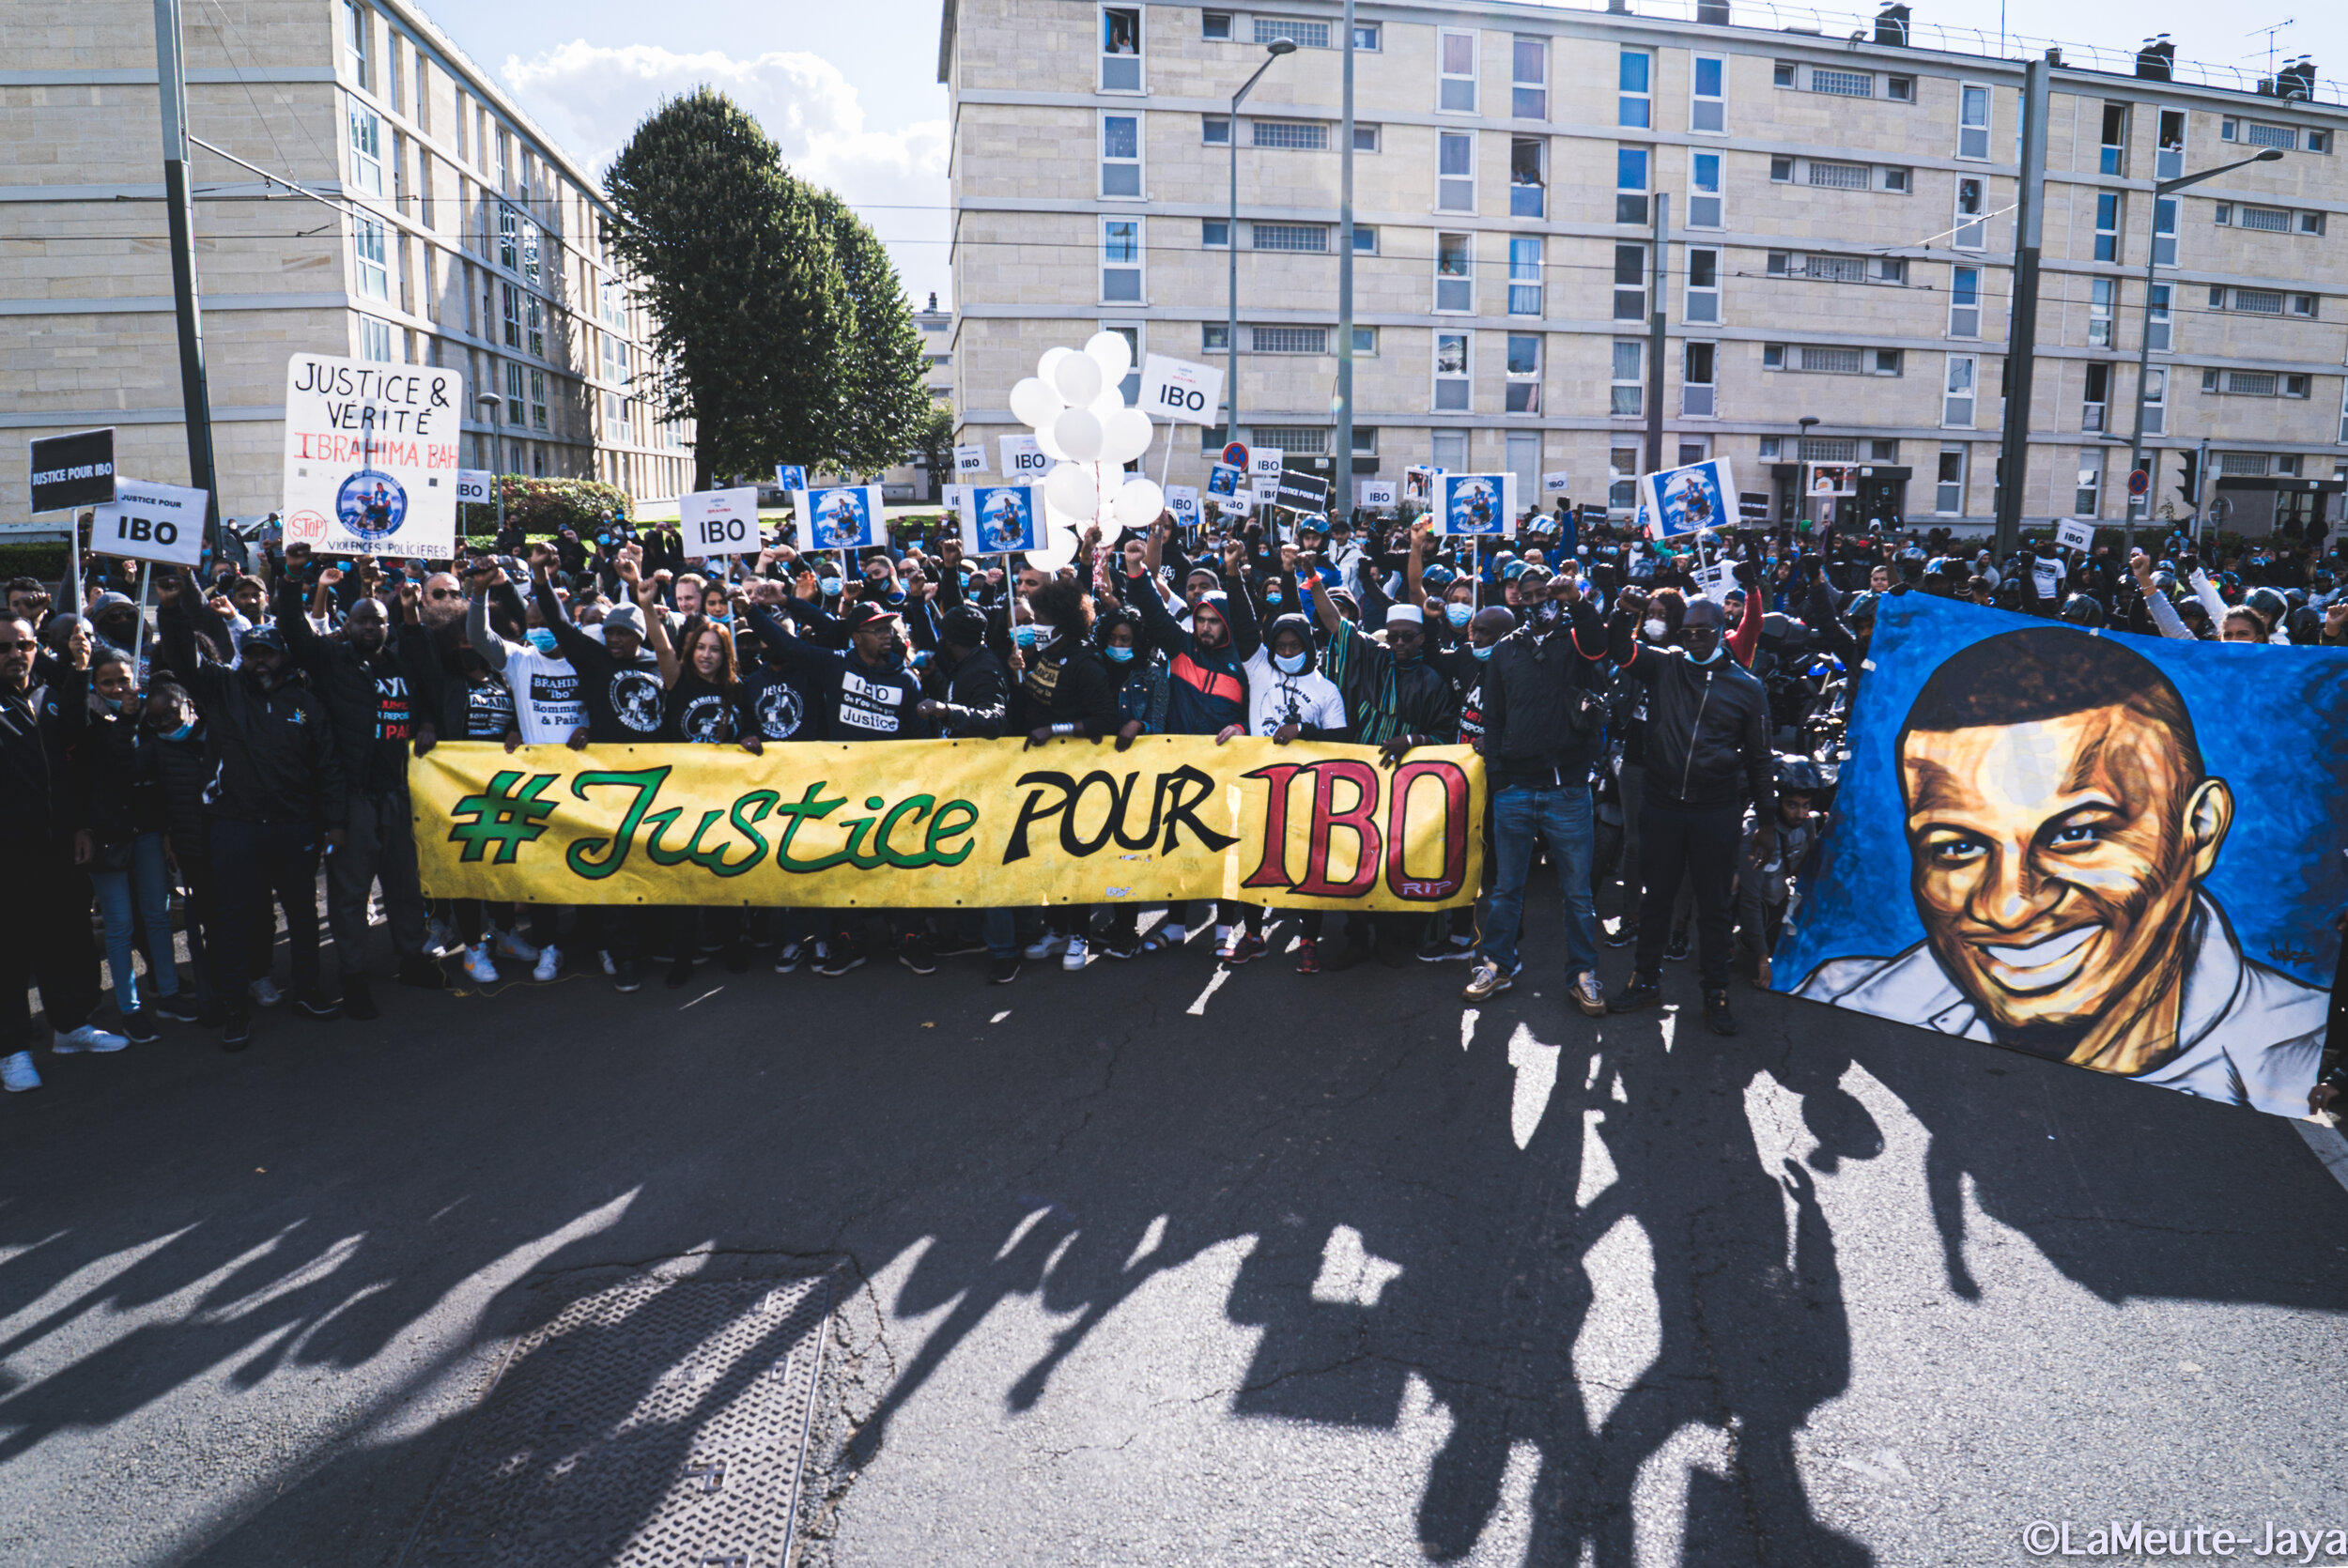 POUR IBO MARCHE 1 an - 10 OCT 2020-44.jpg